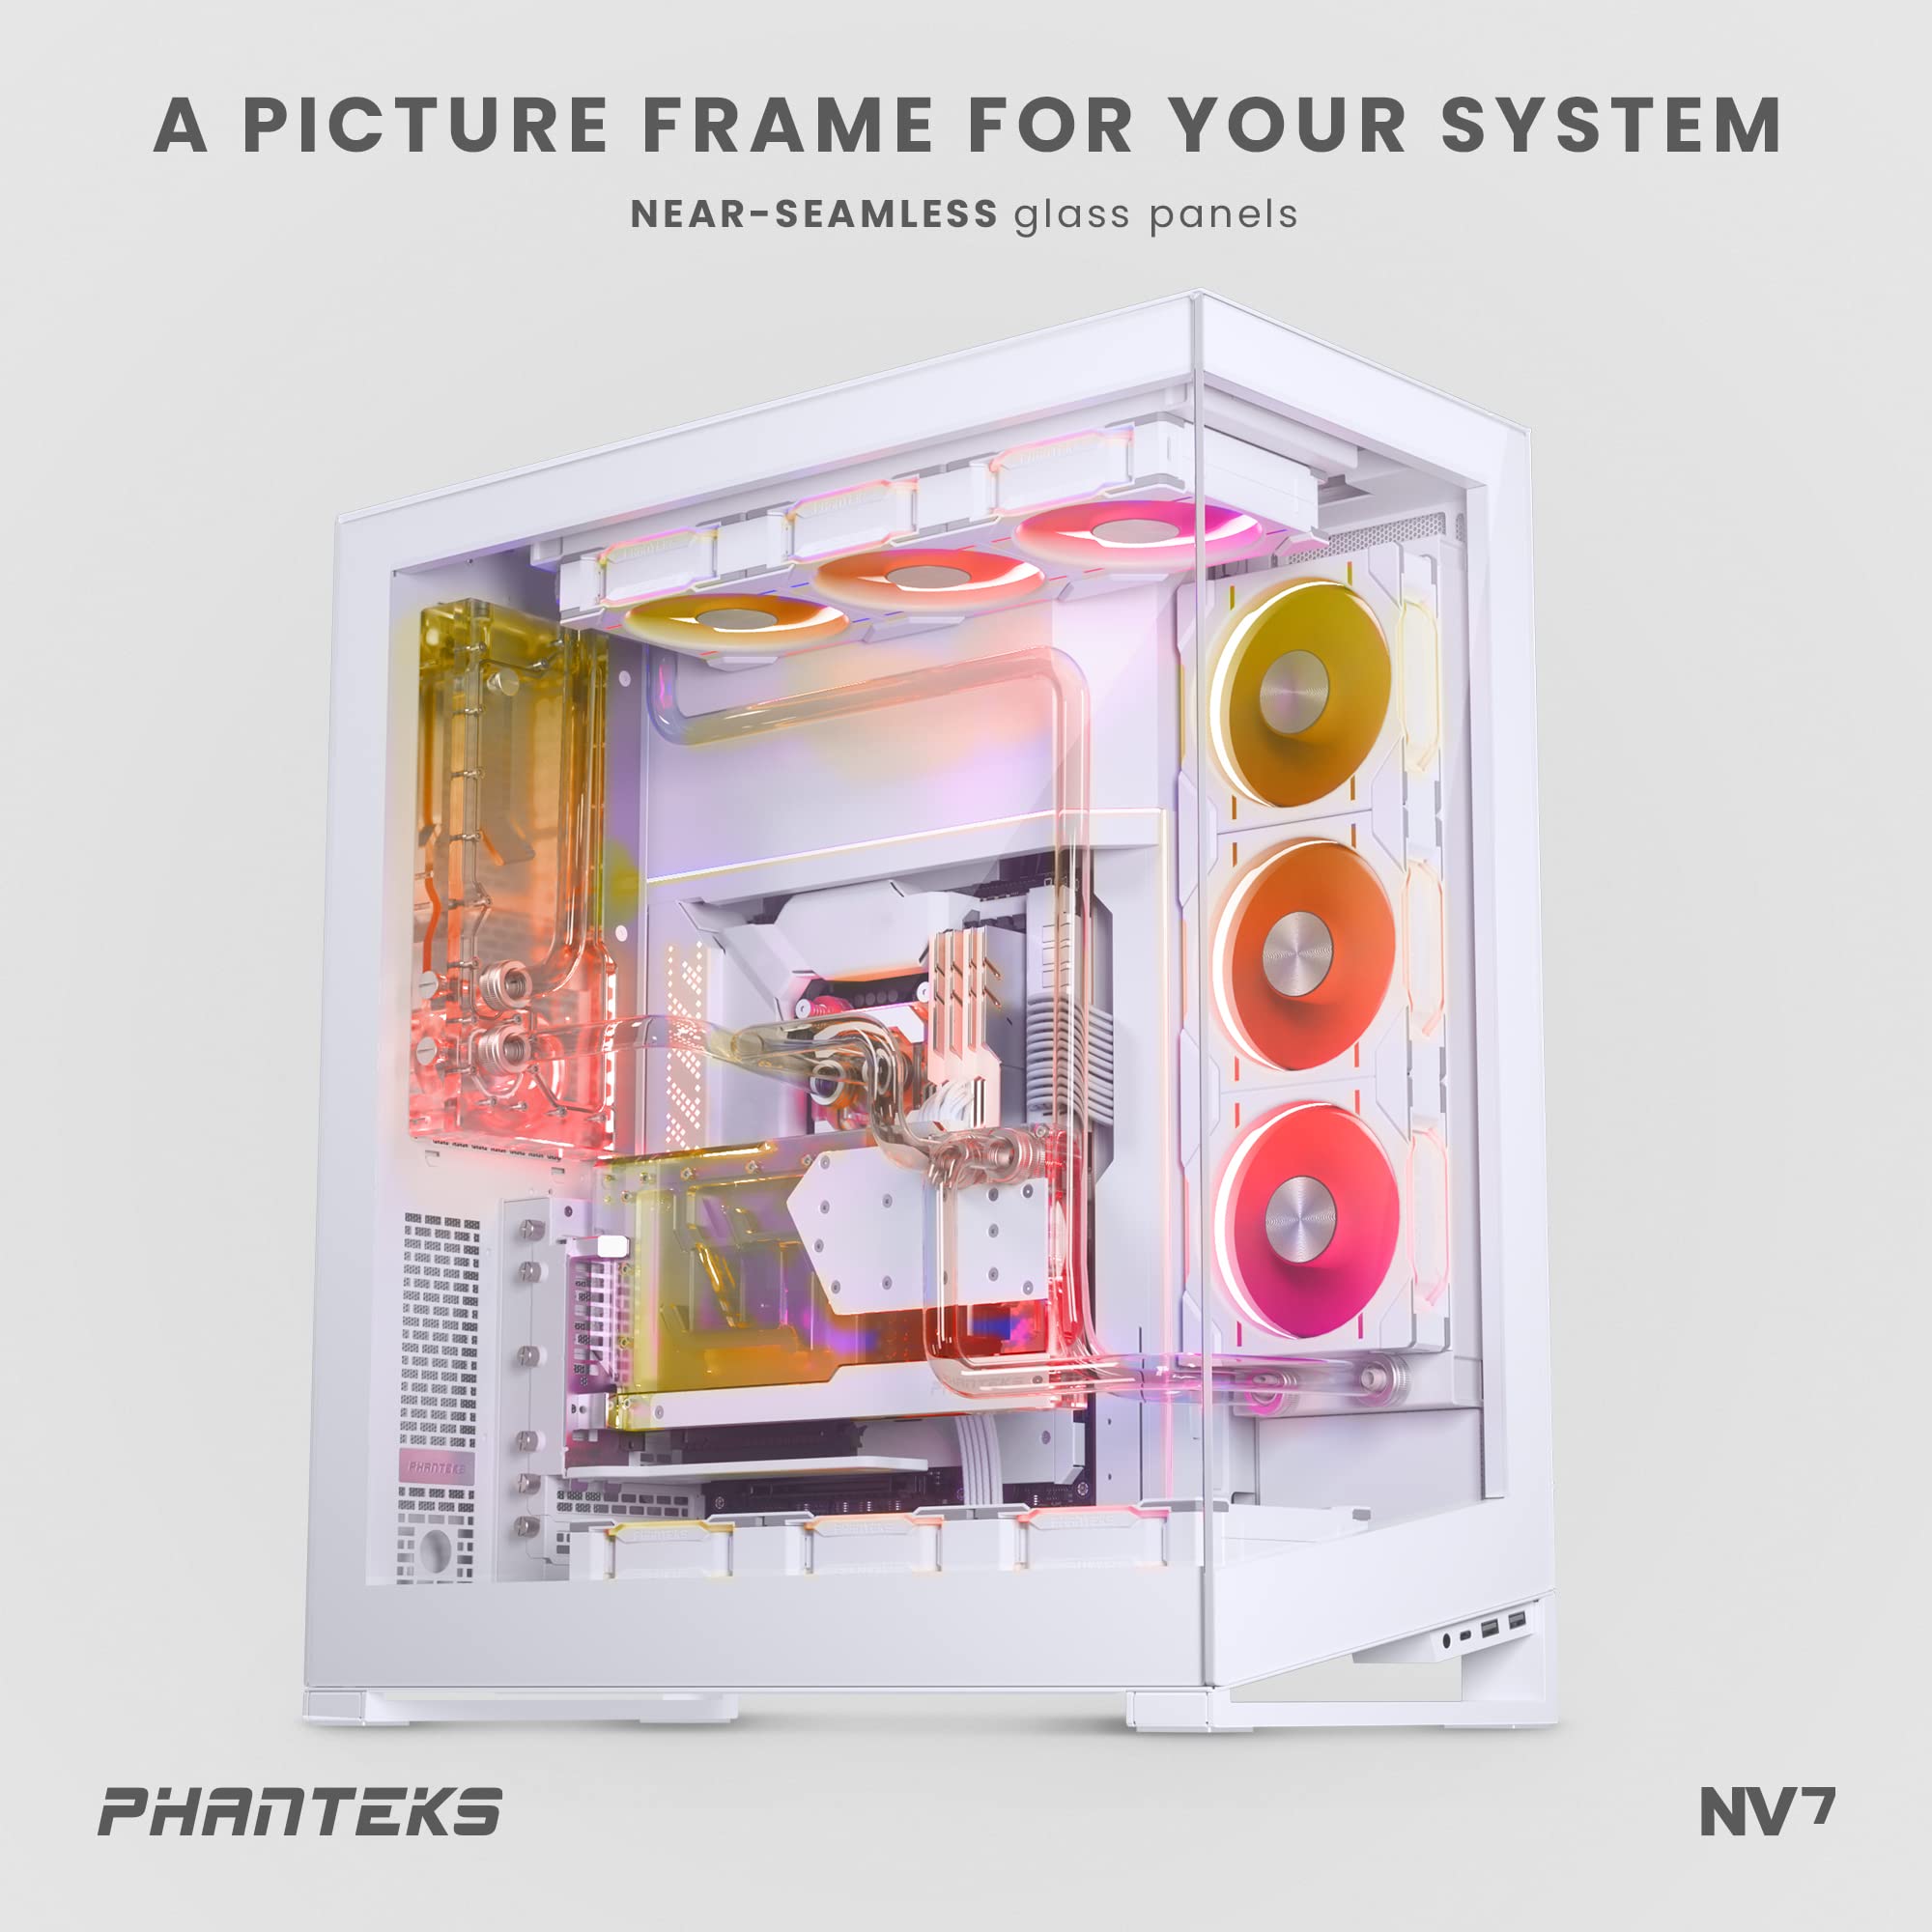 Phanteks (PH-NV723TG_DMW01) NV7 Showcase Full-Tower Chassis, High Airflow Performance, Integrated D/A-RGB Lighting, Seamless Tempered Glass Design, 12 Fan Positions, Matte White